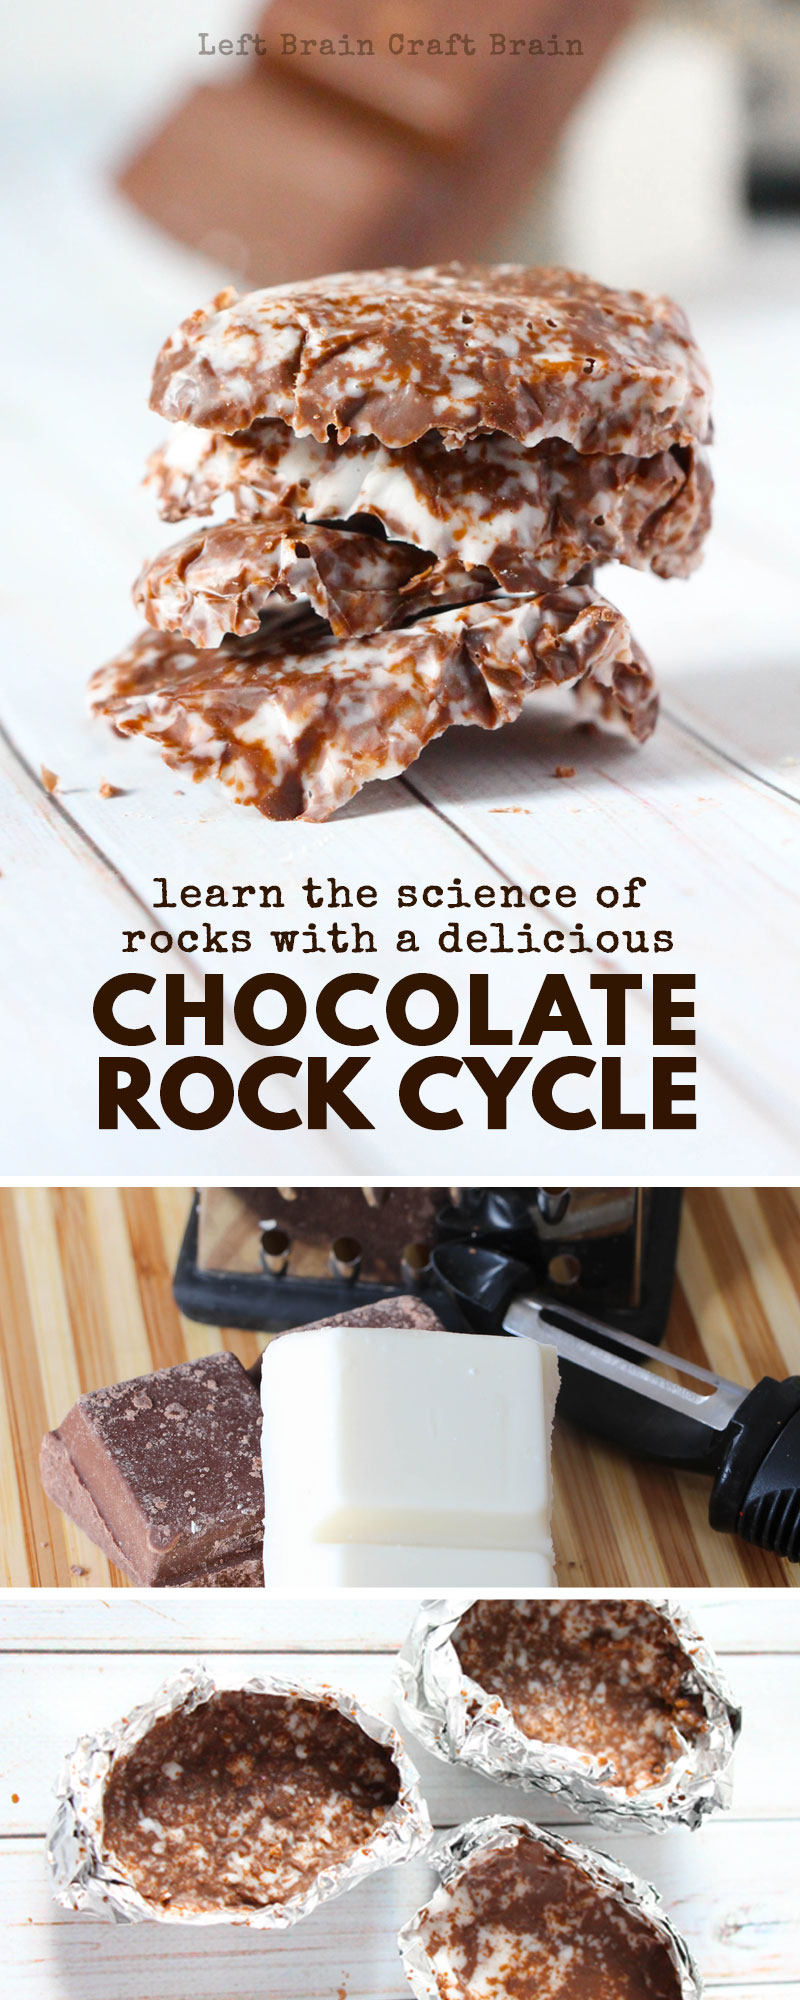 How To Make A Delicious Rock Cycle With Chocolate Rocks Left Brain Craft Brain,Viscose Fabric Dress